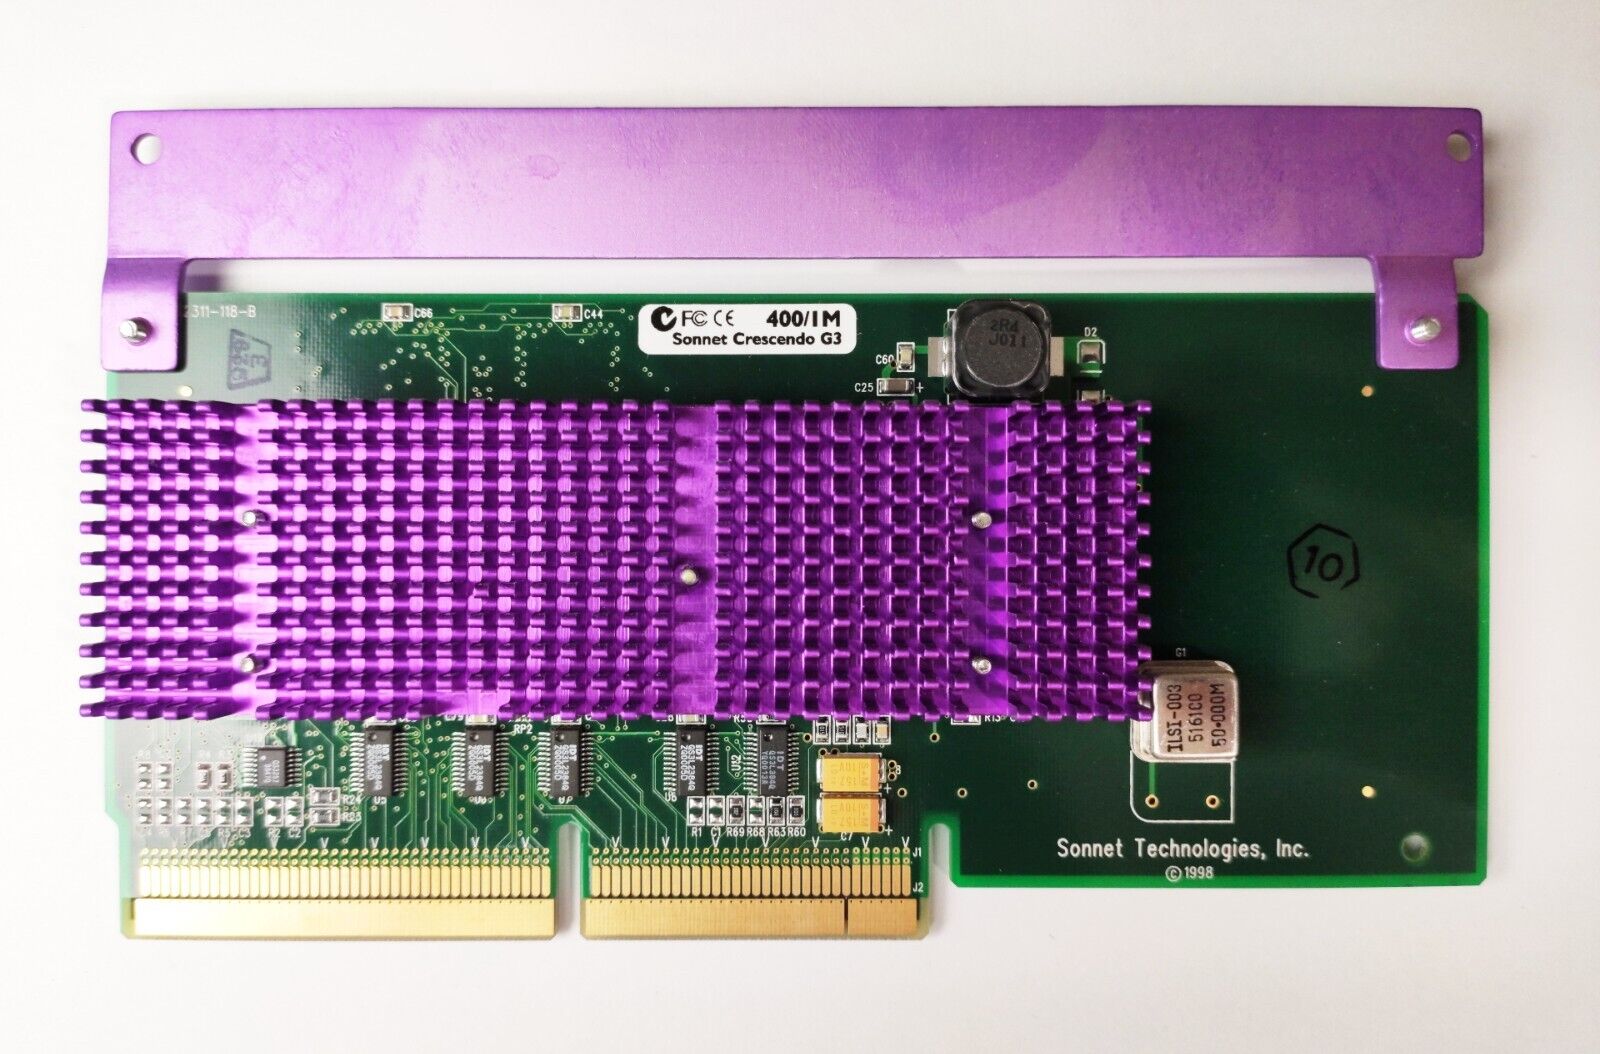 Sonnet Crescendo G3 400MHz 1M CPU-Upgrade Tested Power Mac PCI 9600 8600 +more